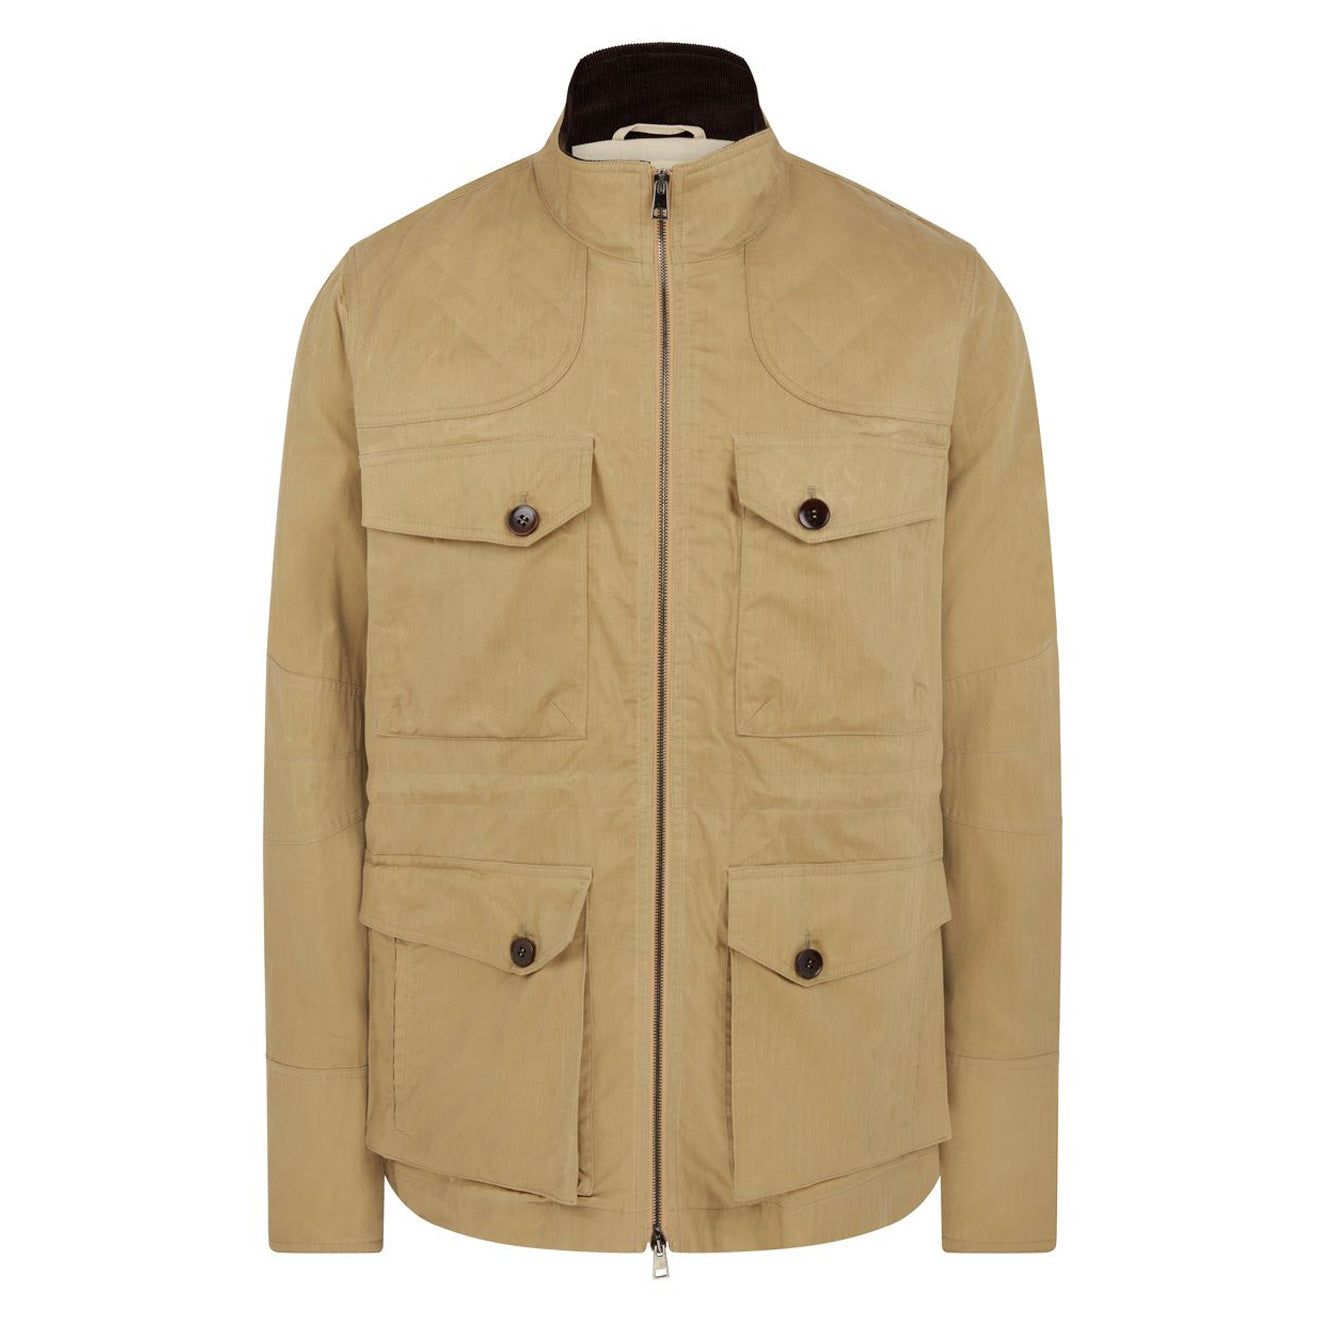 James Purdey Hanning Dry Wax Travel Jacket Beige | The Sporting Lodge